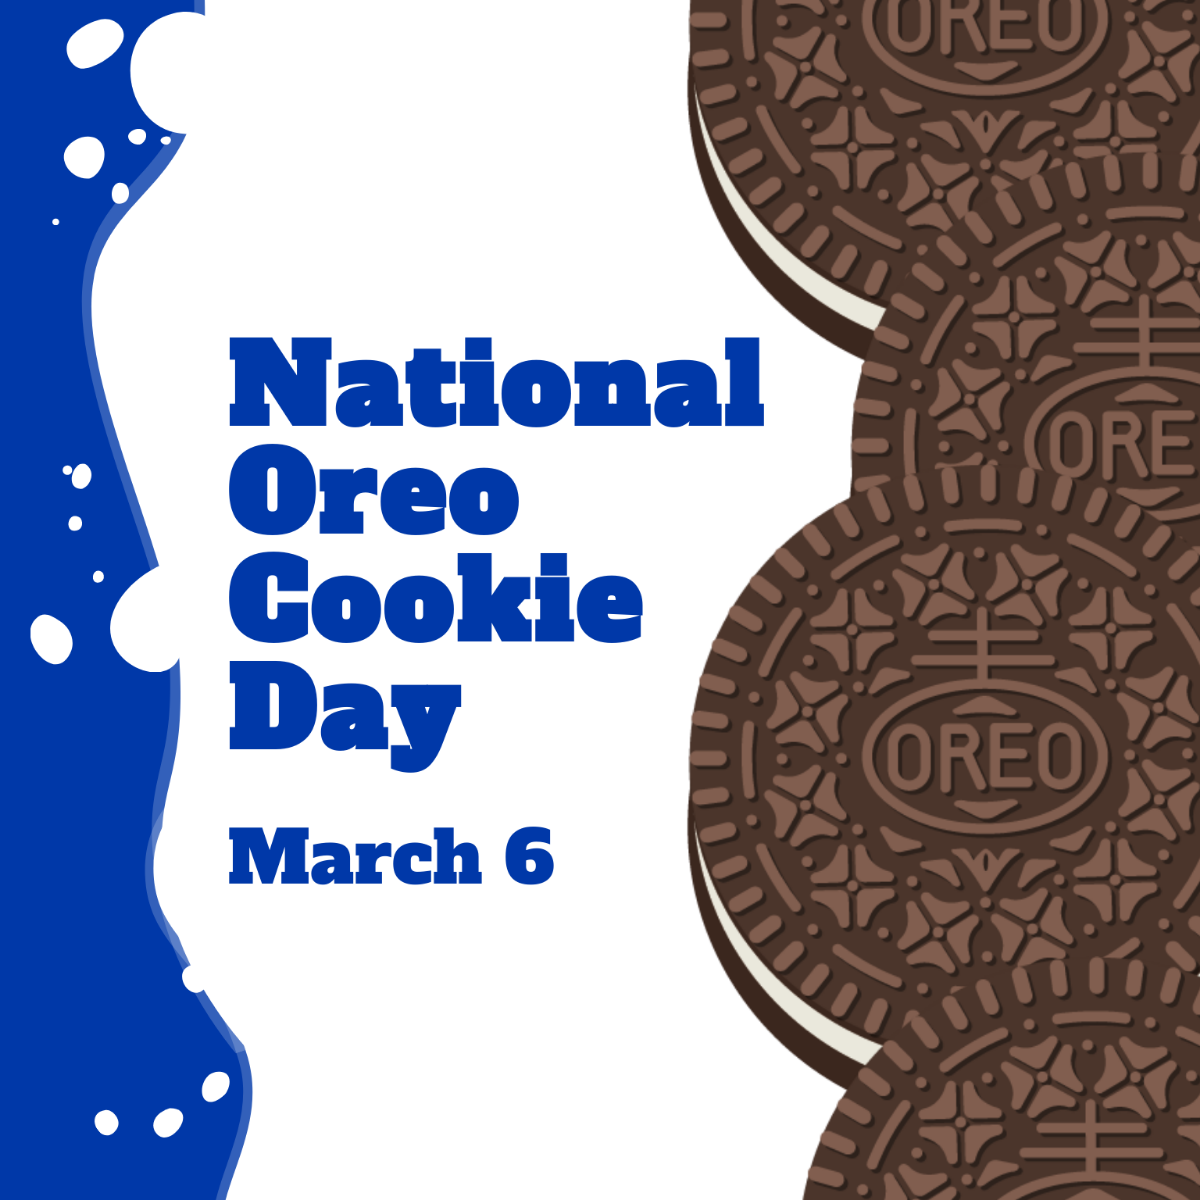 National Oreo Cookie Day Flyer Vector Template